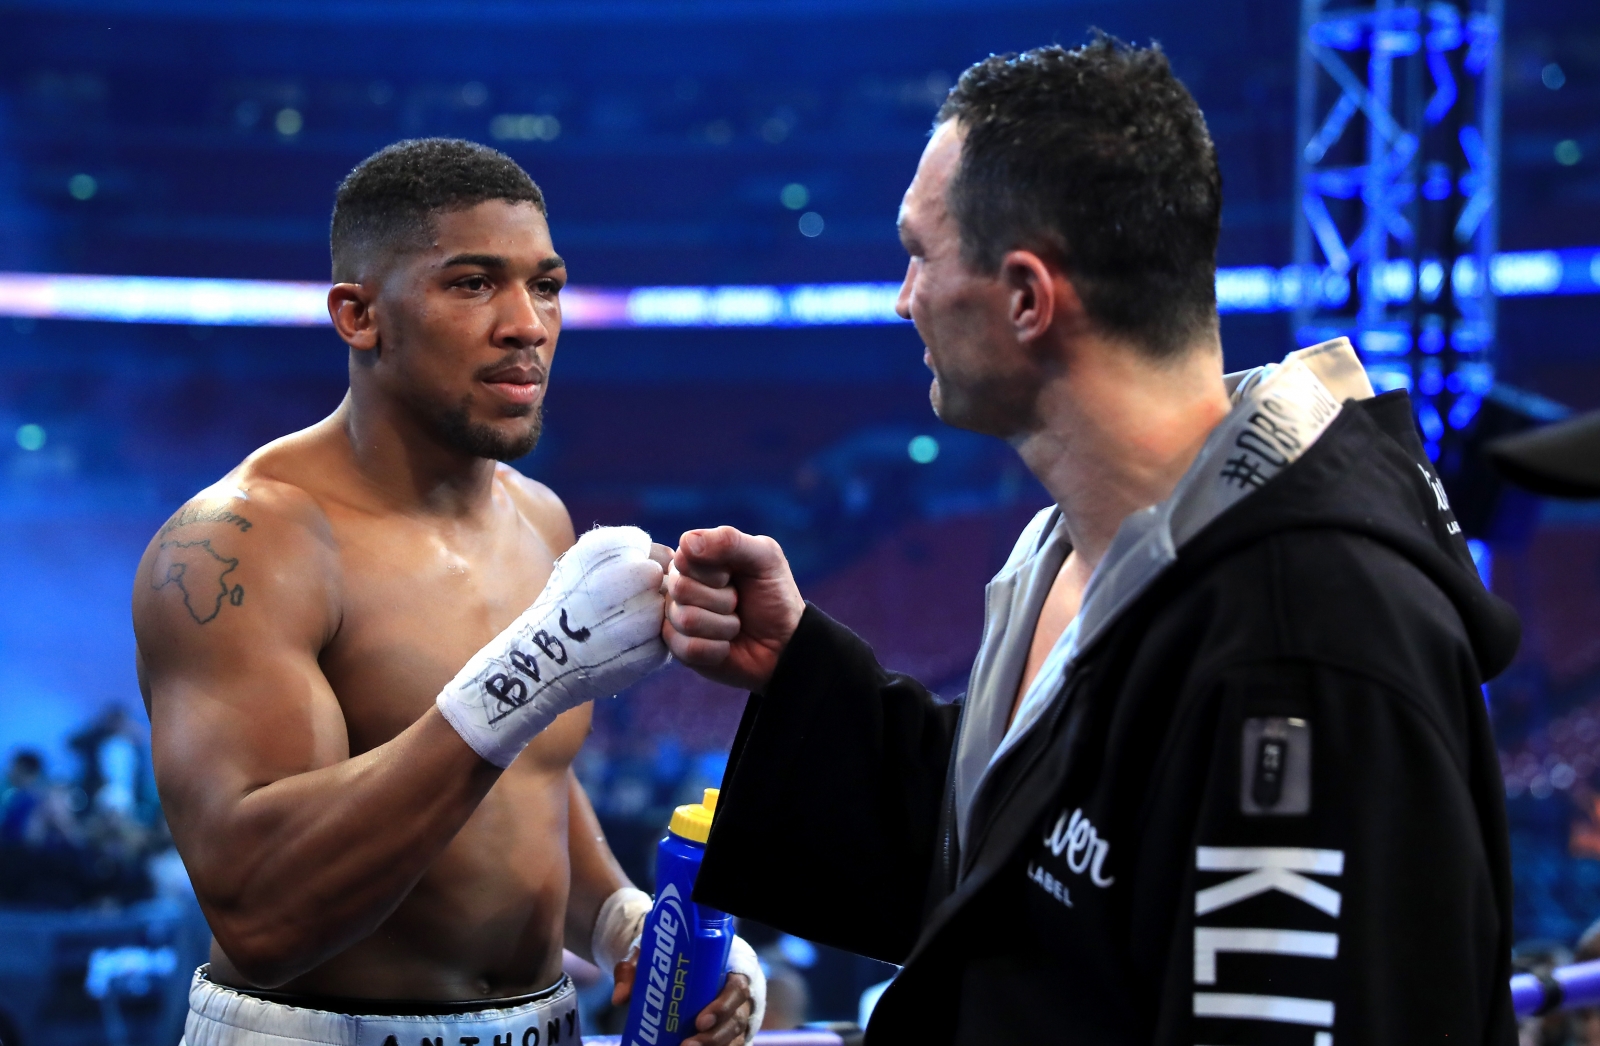 Anthony Joshua vs Wladimir Klitschko rematch could be confirmed this week